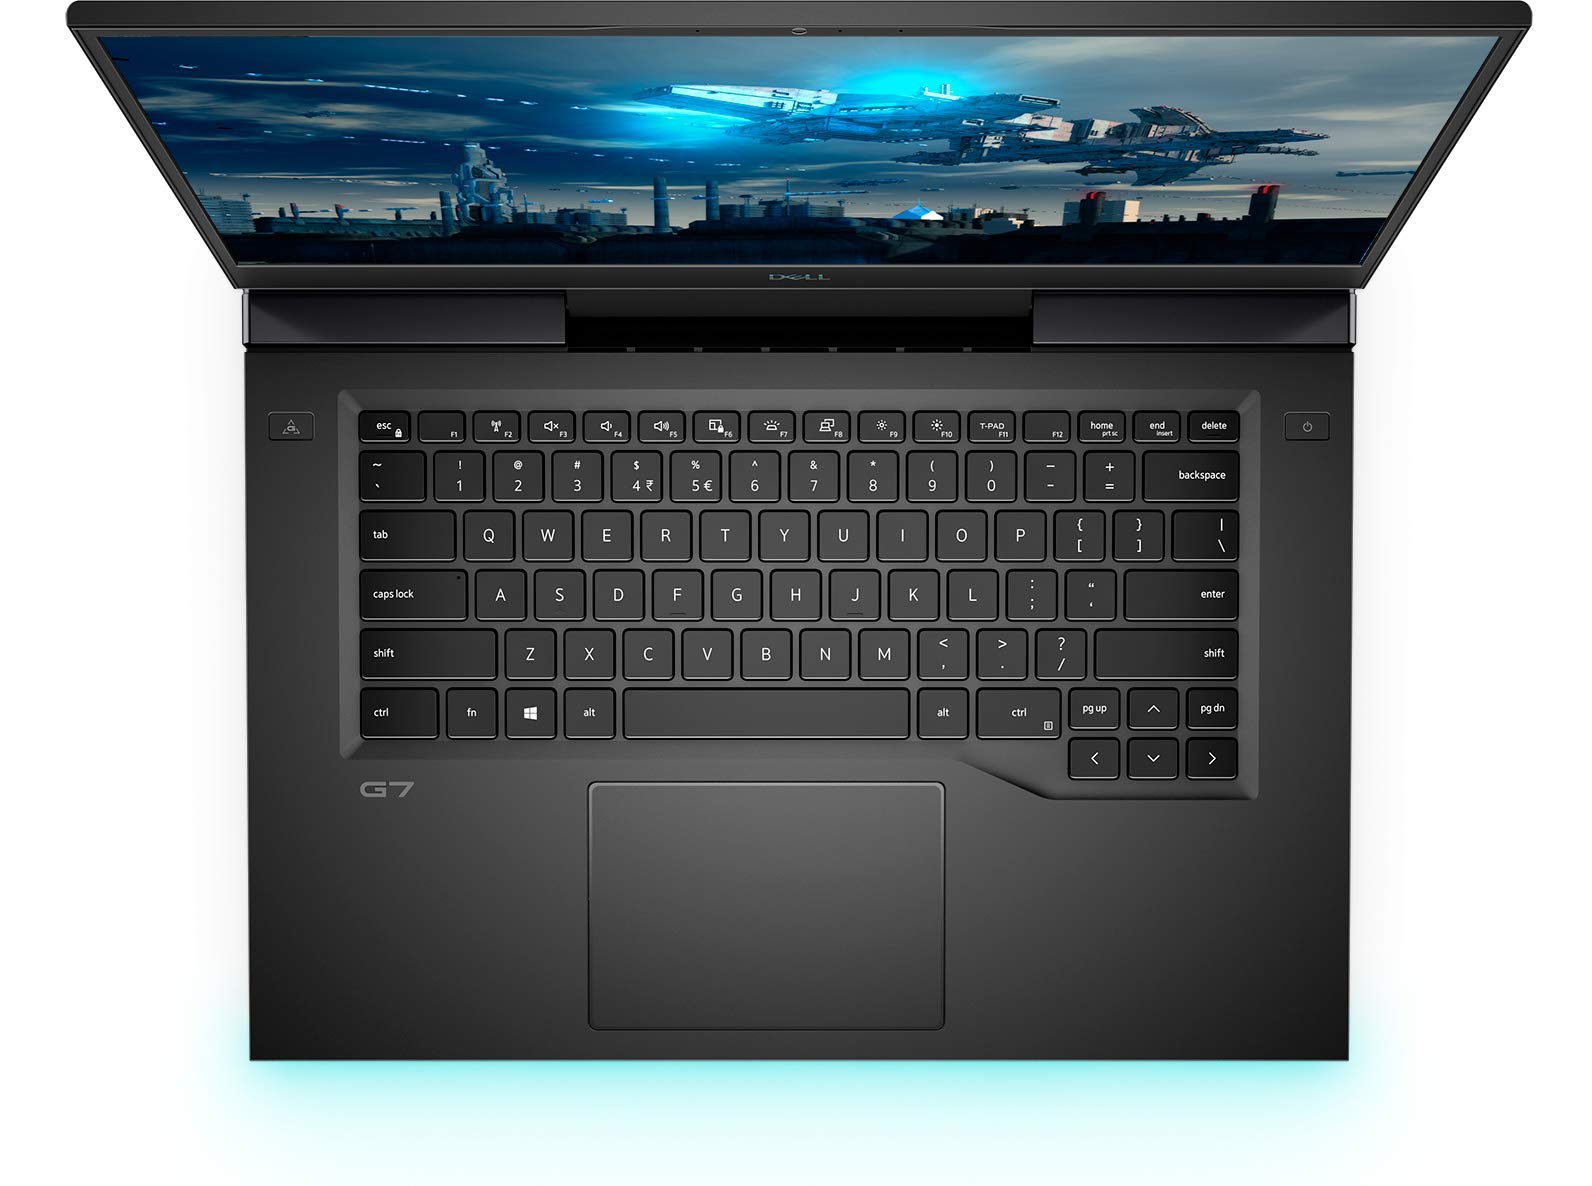 Dell Inspiron G7 15 7500 15.6" Gaming (Latest Model) Core I7-10750H(6-Core, 2.6-5.0Ghz) 1TB PCIe SSD 16GB 3200Mhz RAM RTX 2060 6GB Full HD (1920x1080) 144Hz 4-Zone RGB Backlit Win 10 Home (Renewed)